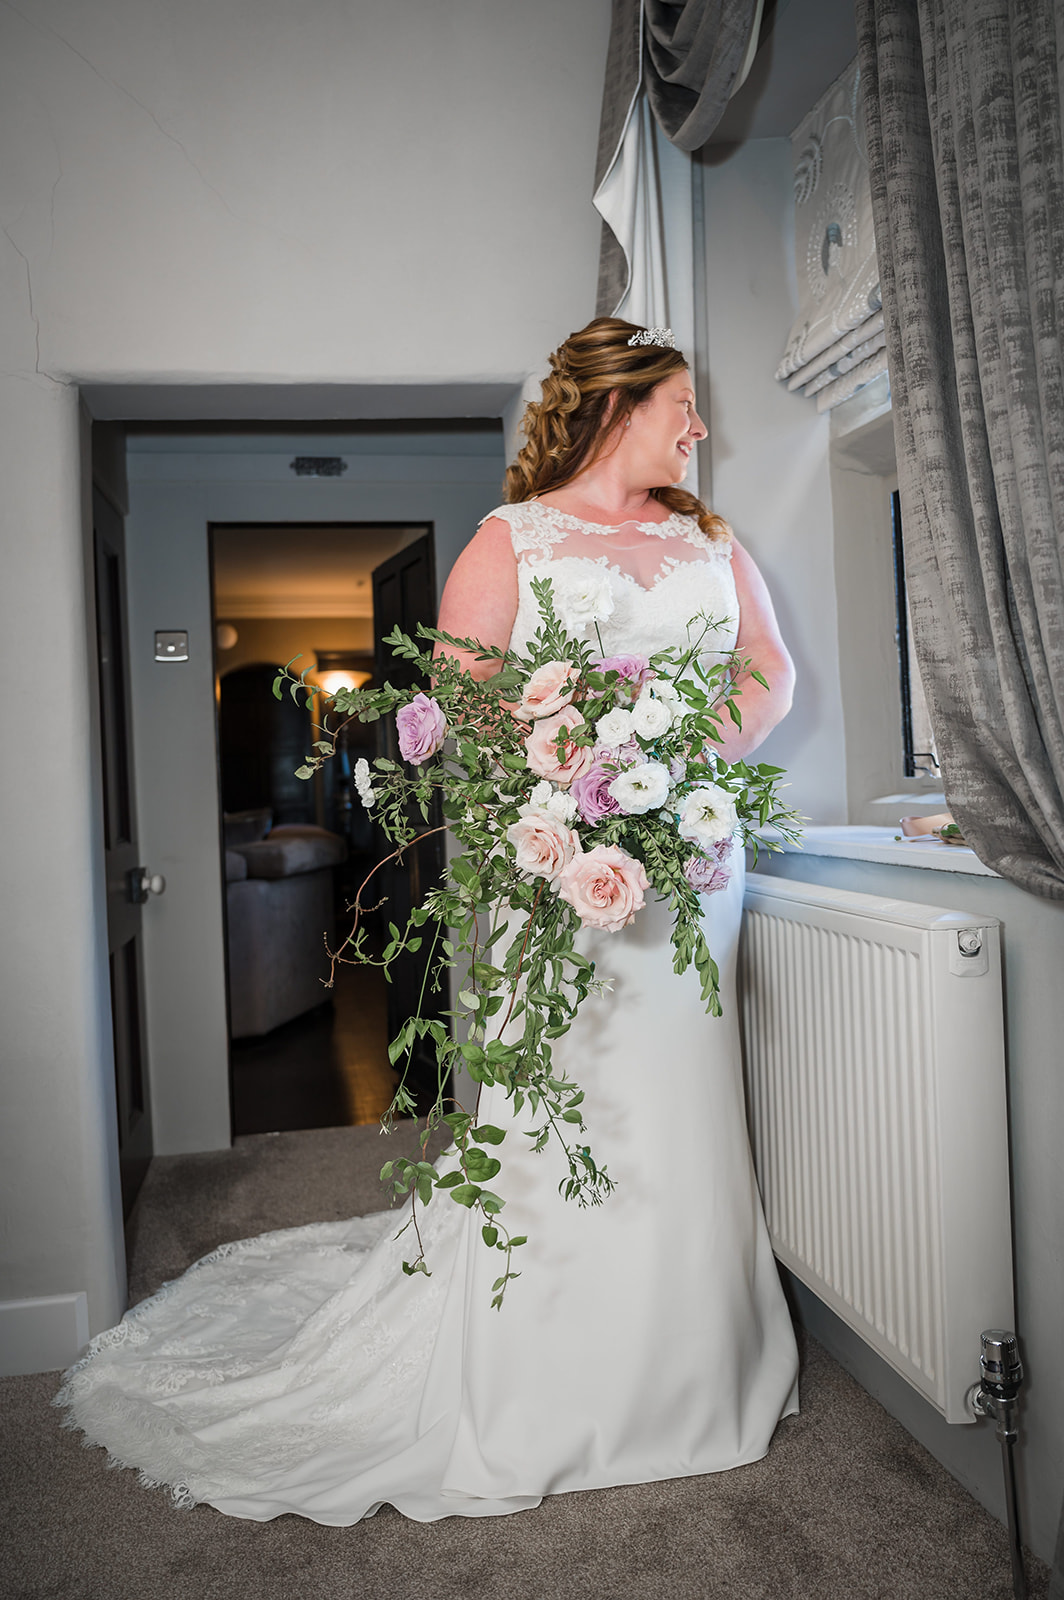 a bride stands in her wedding dress looking out of the window, holding a bouquet of mixed pink and white flowers